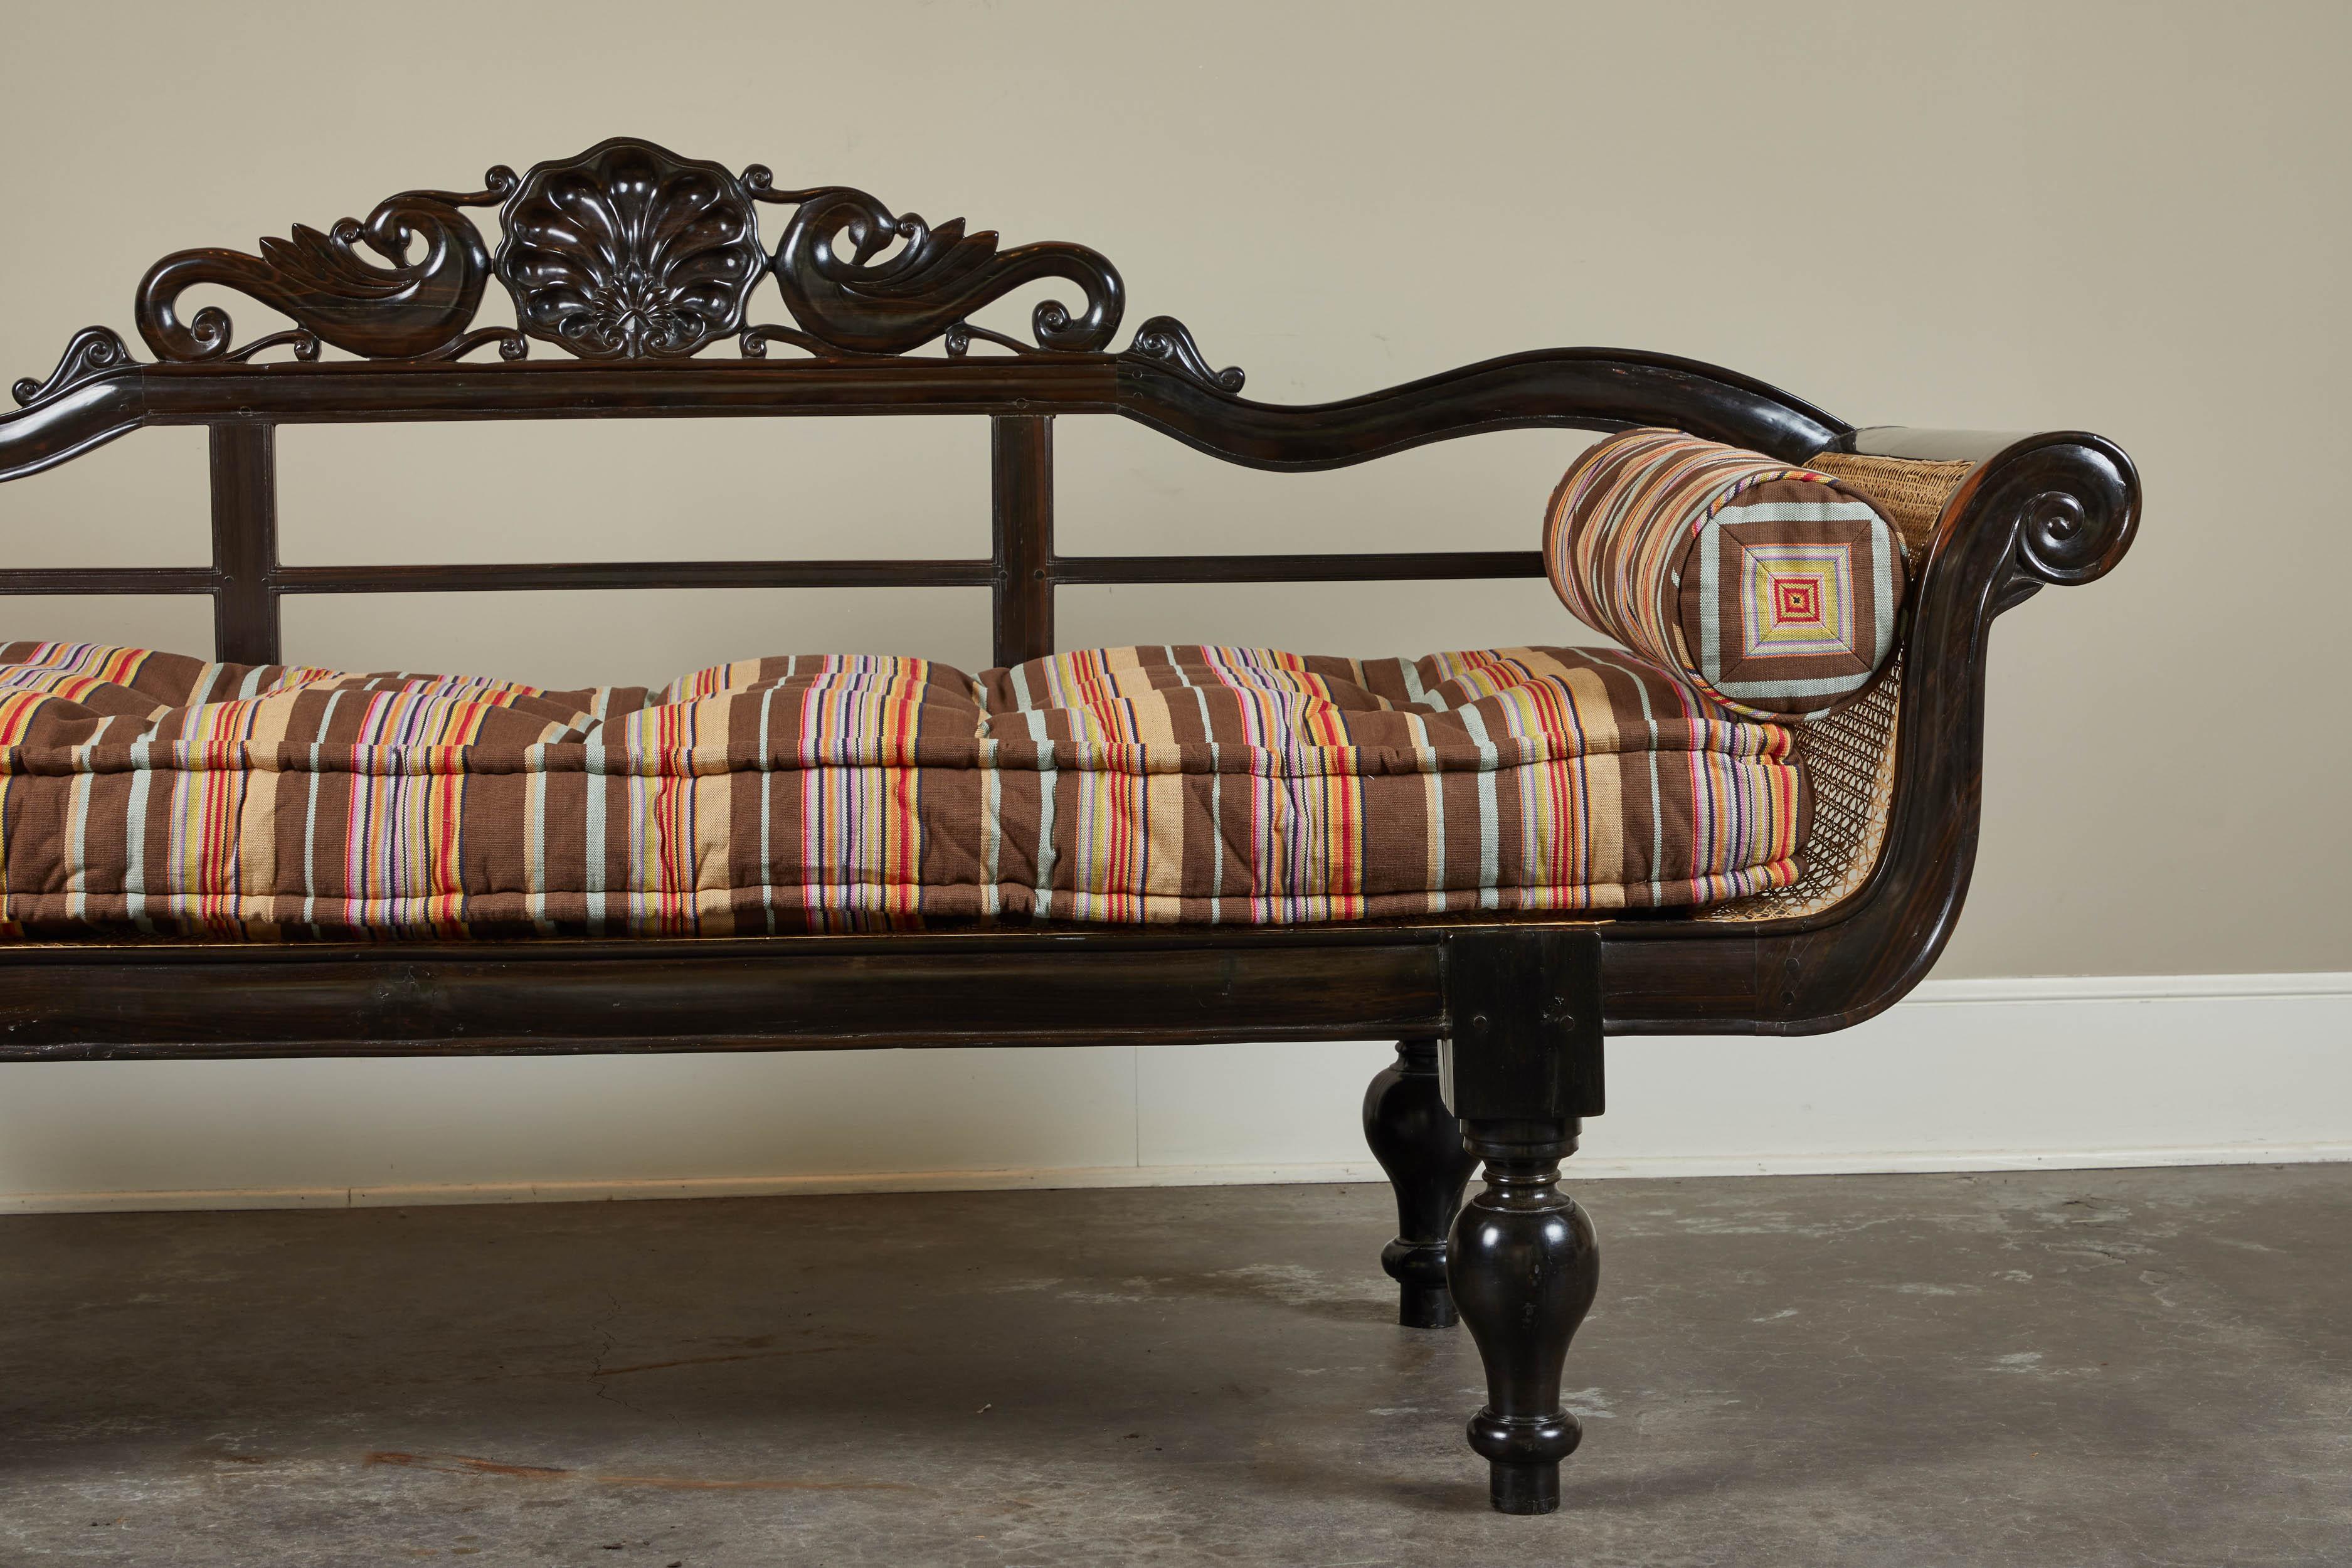 Anglo-Indian 20th Century British Colonial Ebony Bench with Caned Seat and Arms